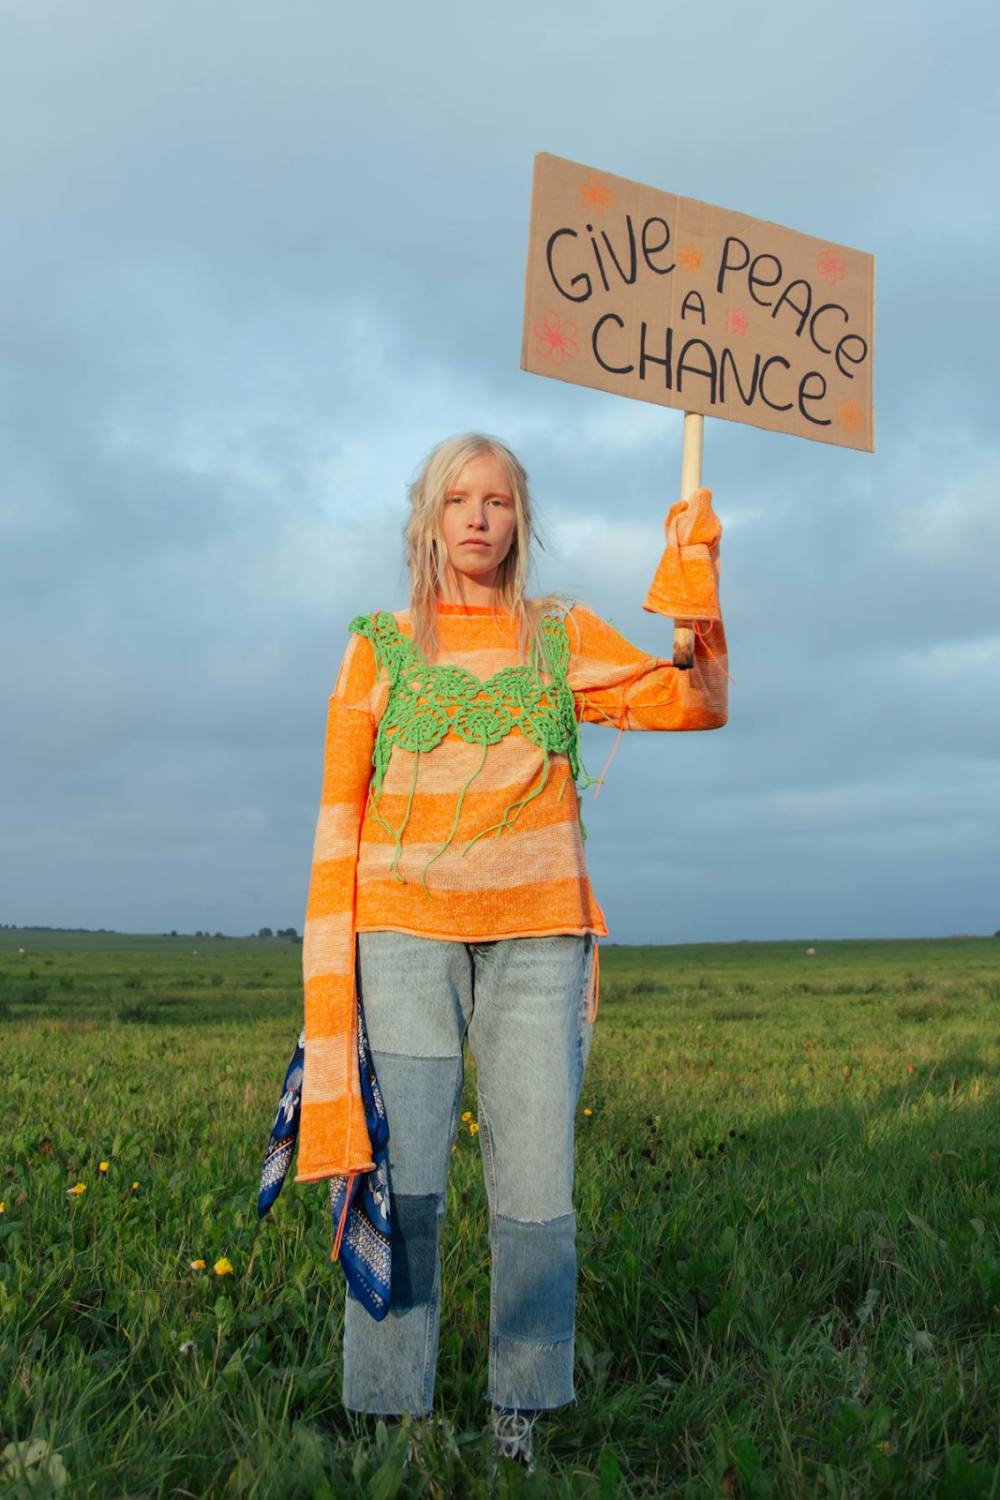 a woman holding a placard stating "give peace a chance"